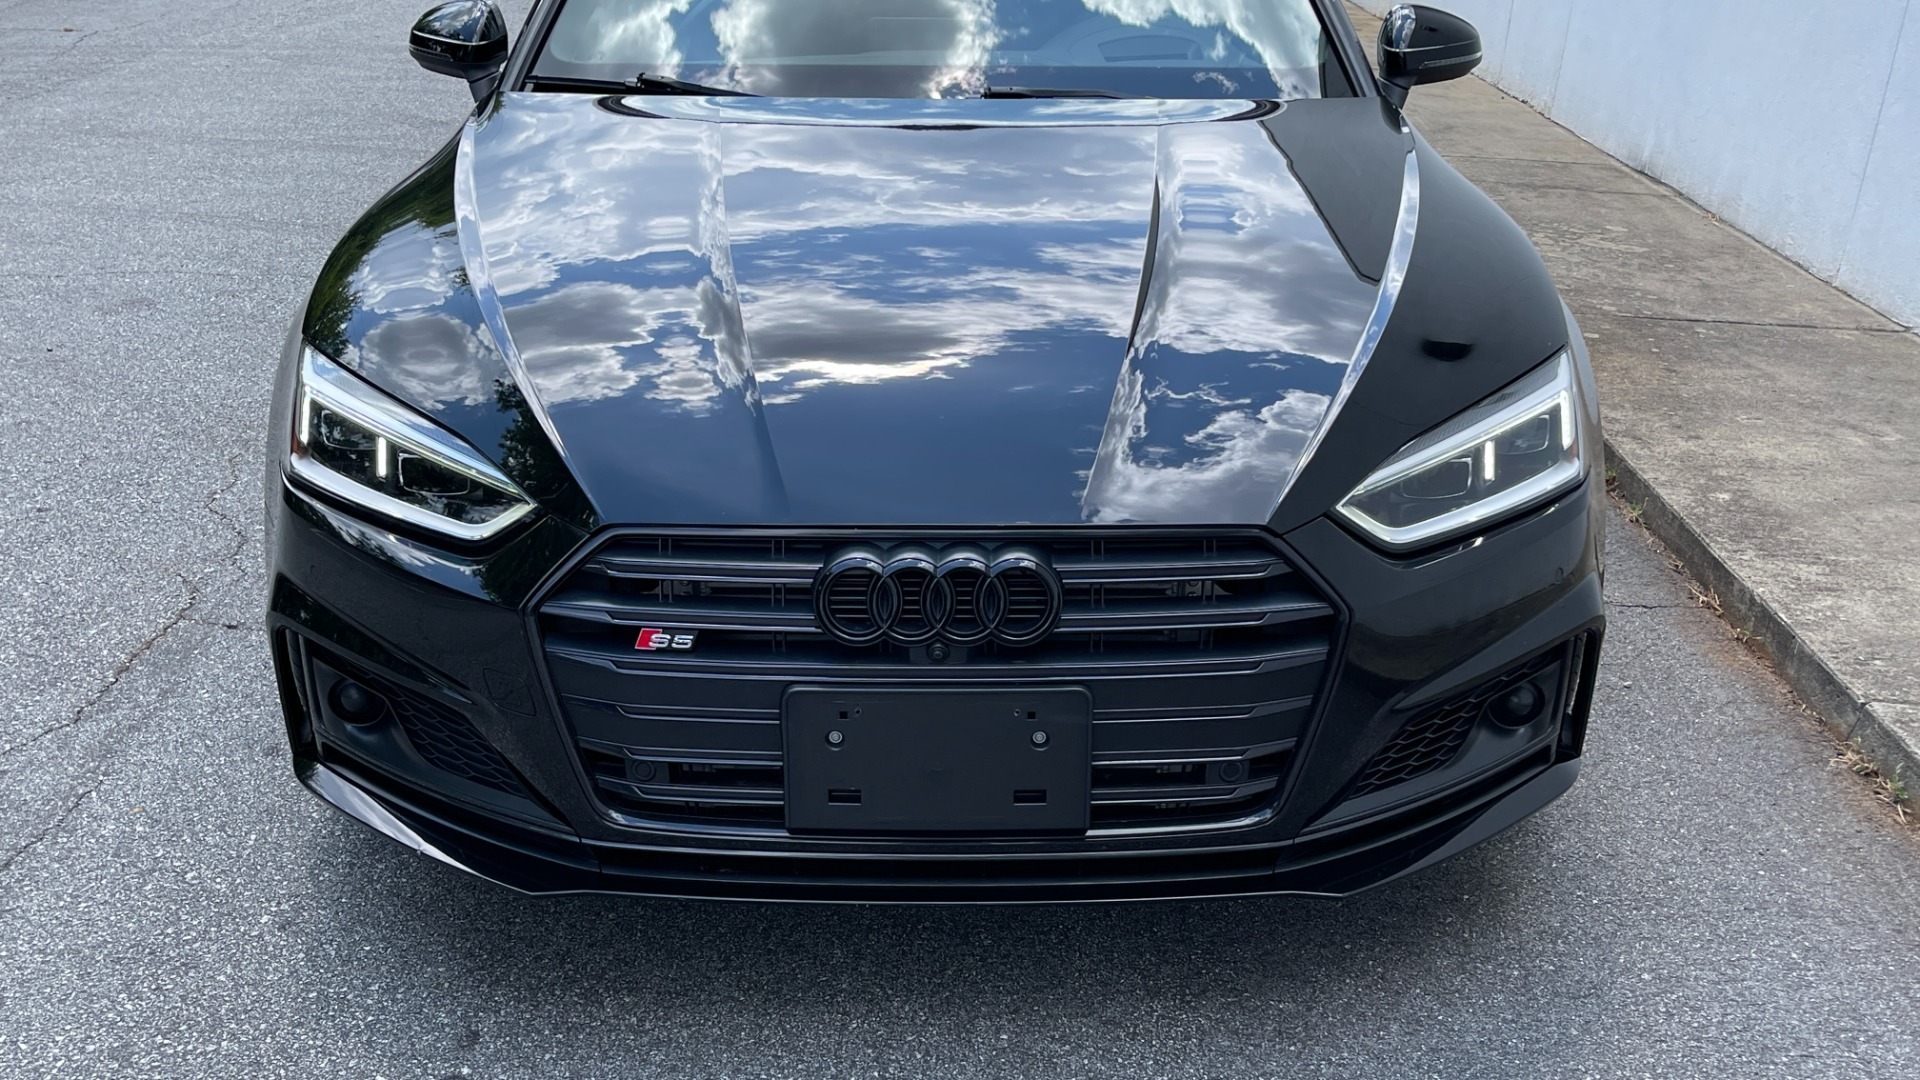 Used 2019 Audi S5 Sportback Prestige / BC FORGED WHEELS / APR INTAKE / APR EXHAUST / CARBON FIBER for sale $53,995 at Formula Imports in Charlotte NC 28227 7